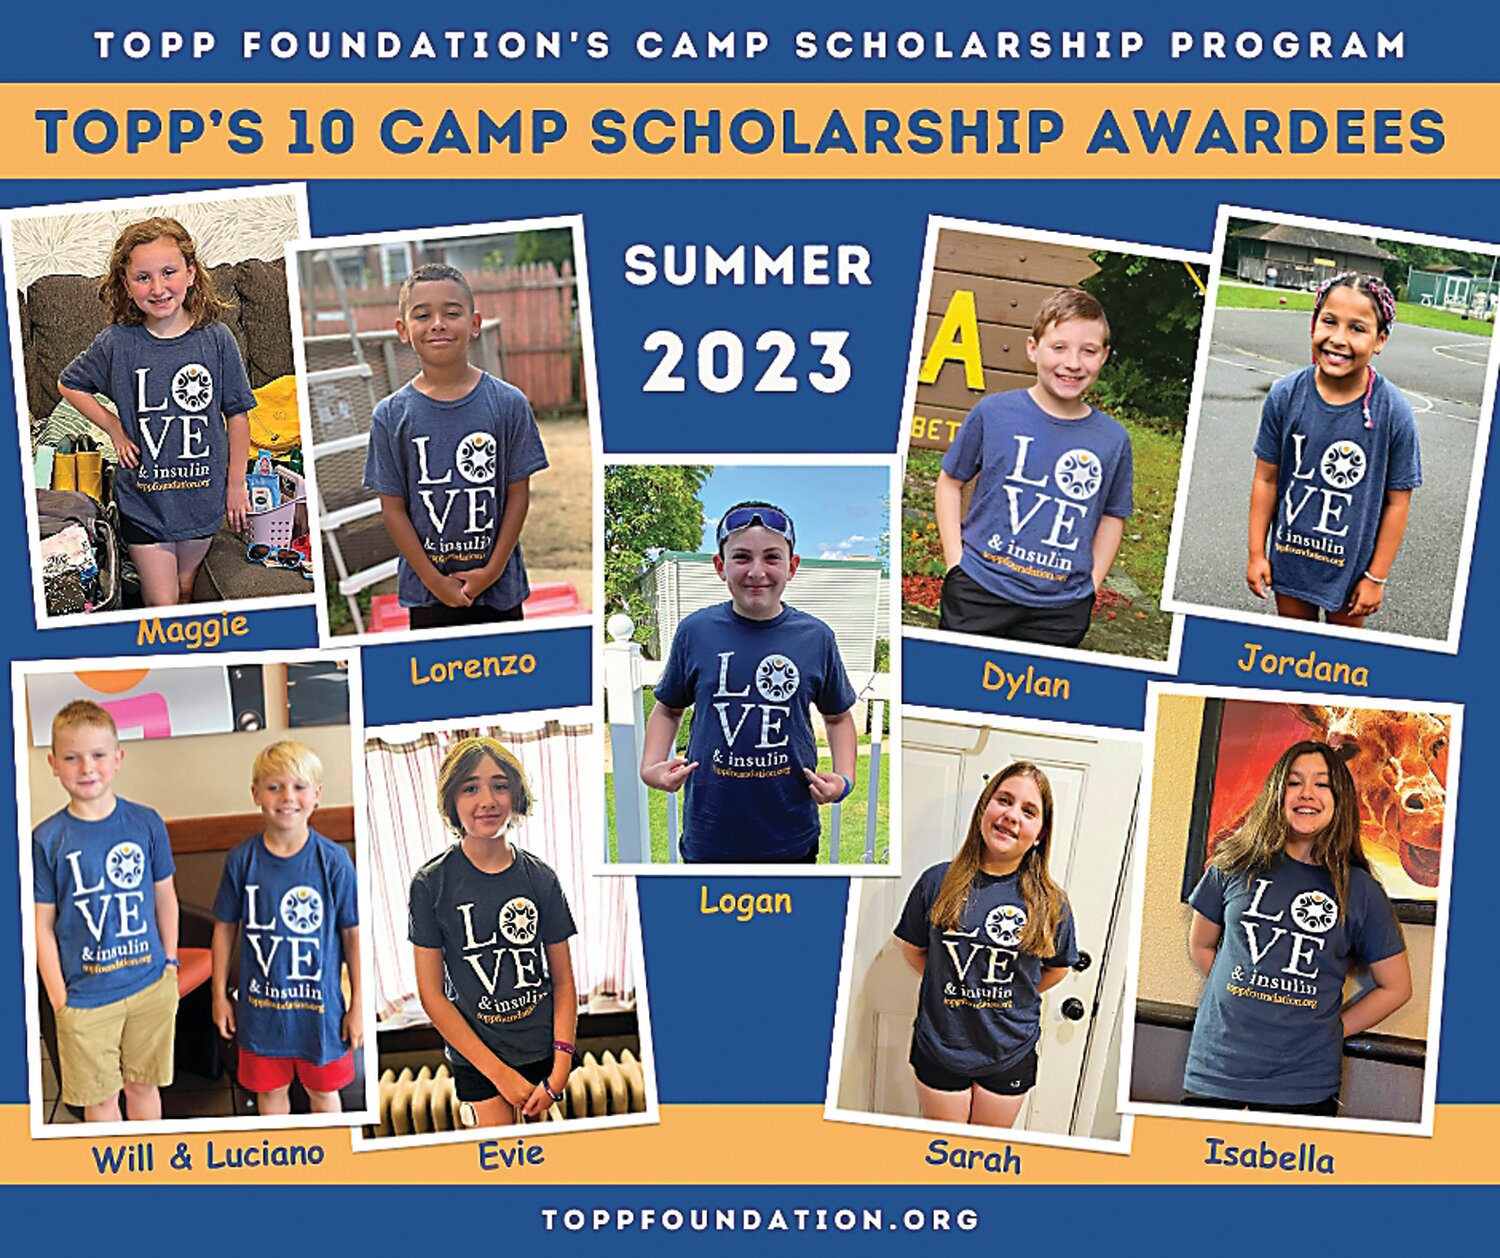 The 2023 TOPP Foundation Camp Scholarship recipients.